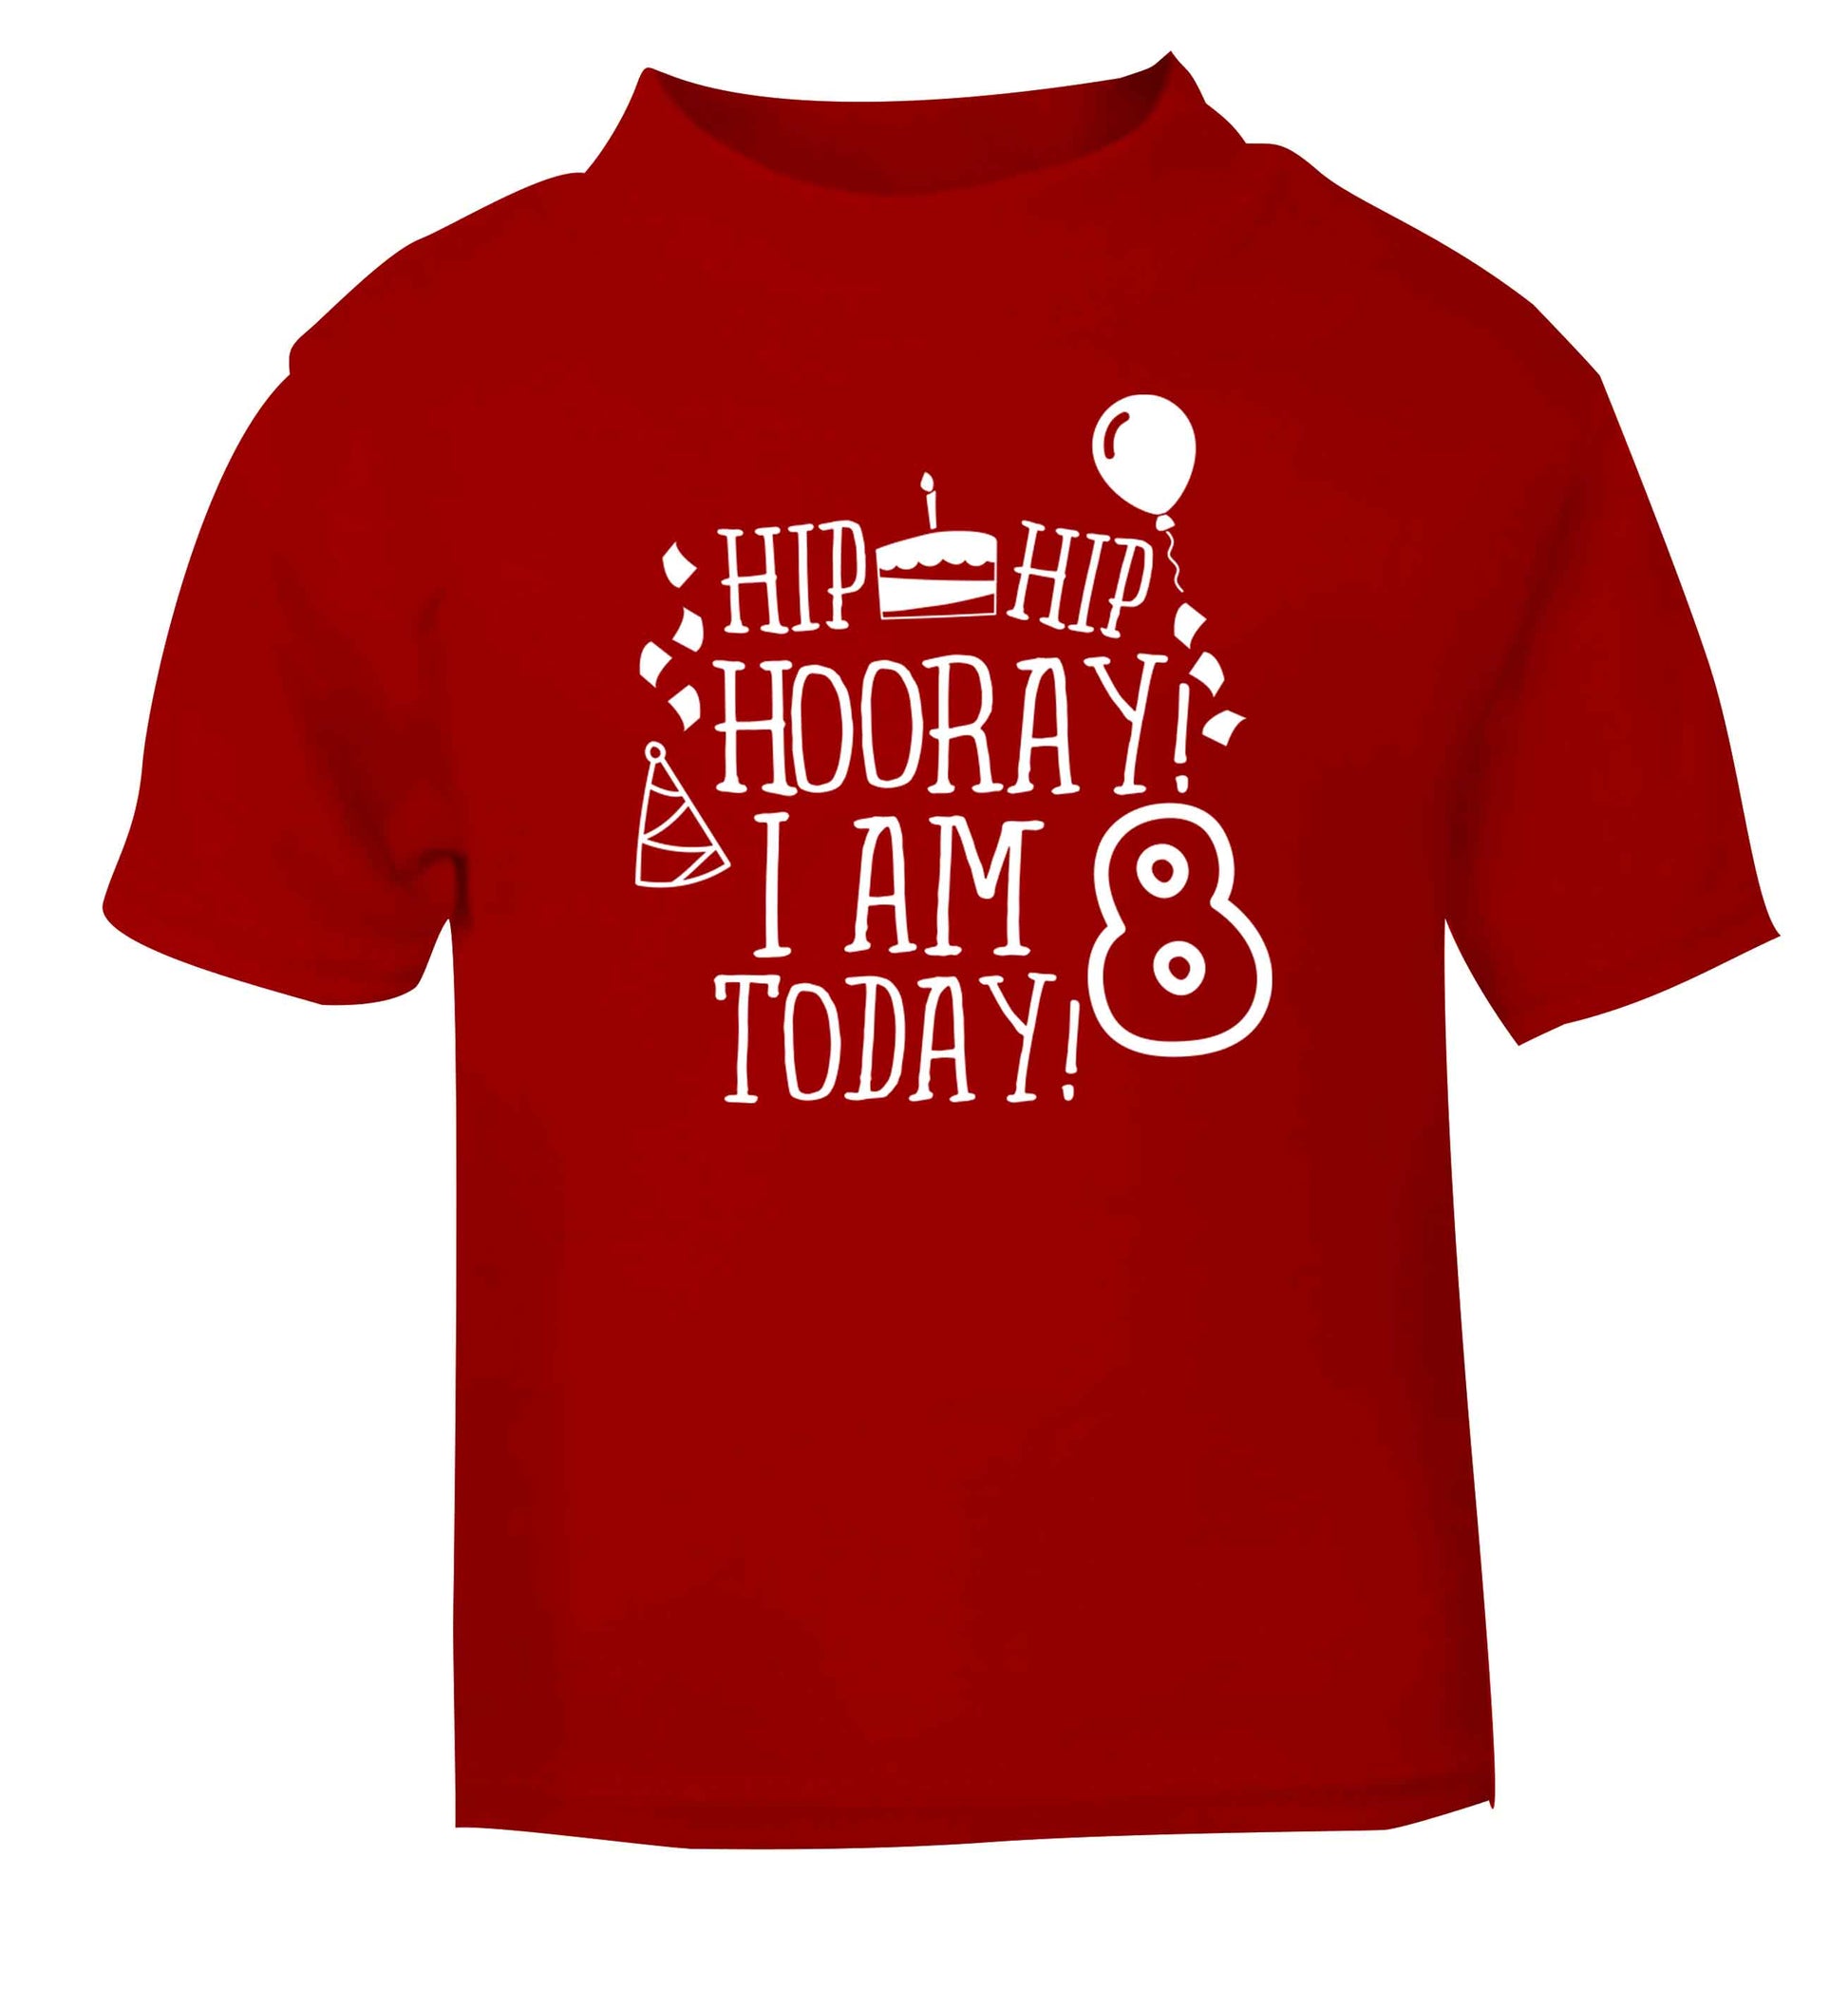 Hip hip hooray I am 8 today! red baby toddler Tshirt 2 Years